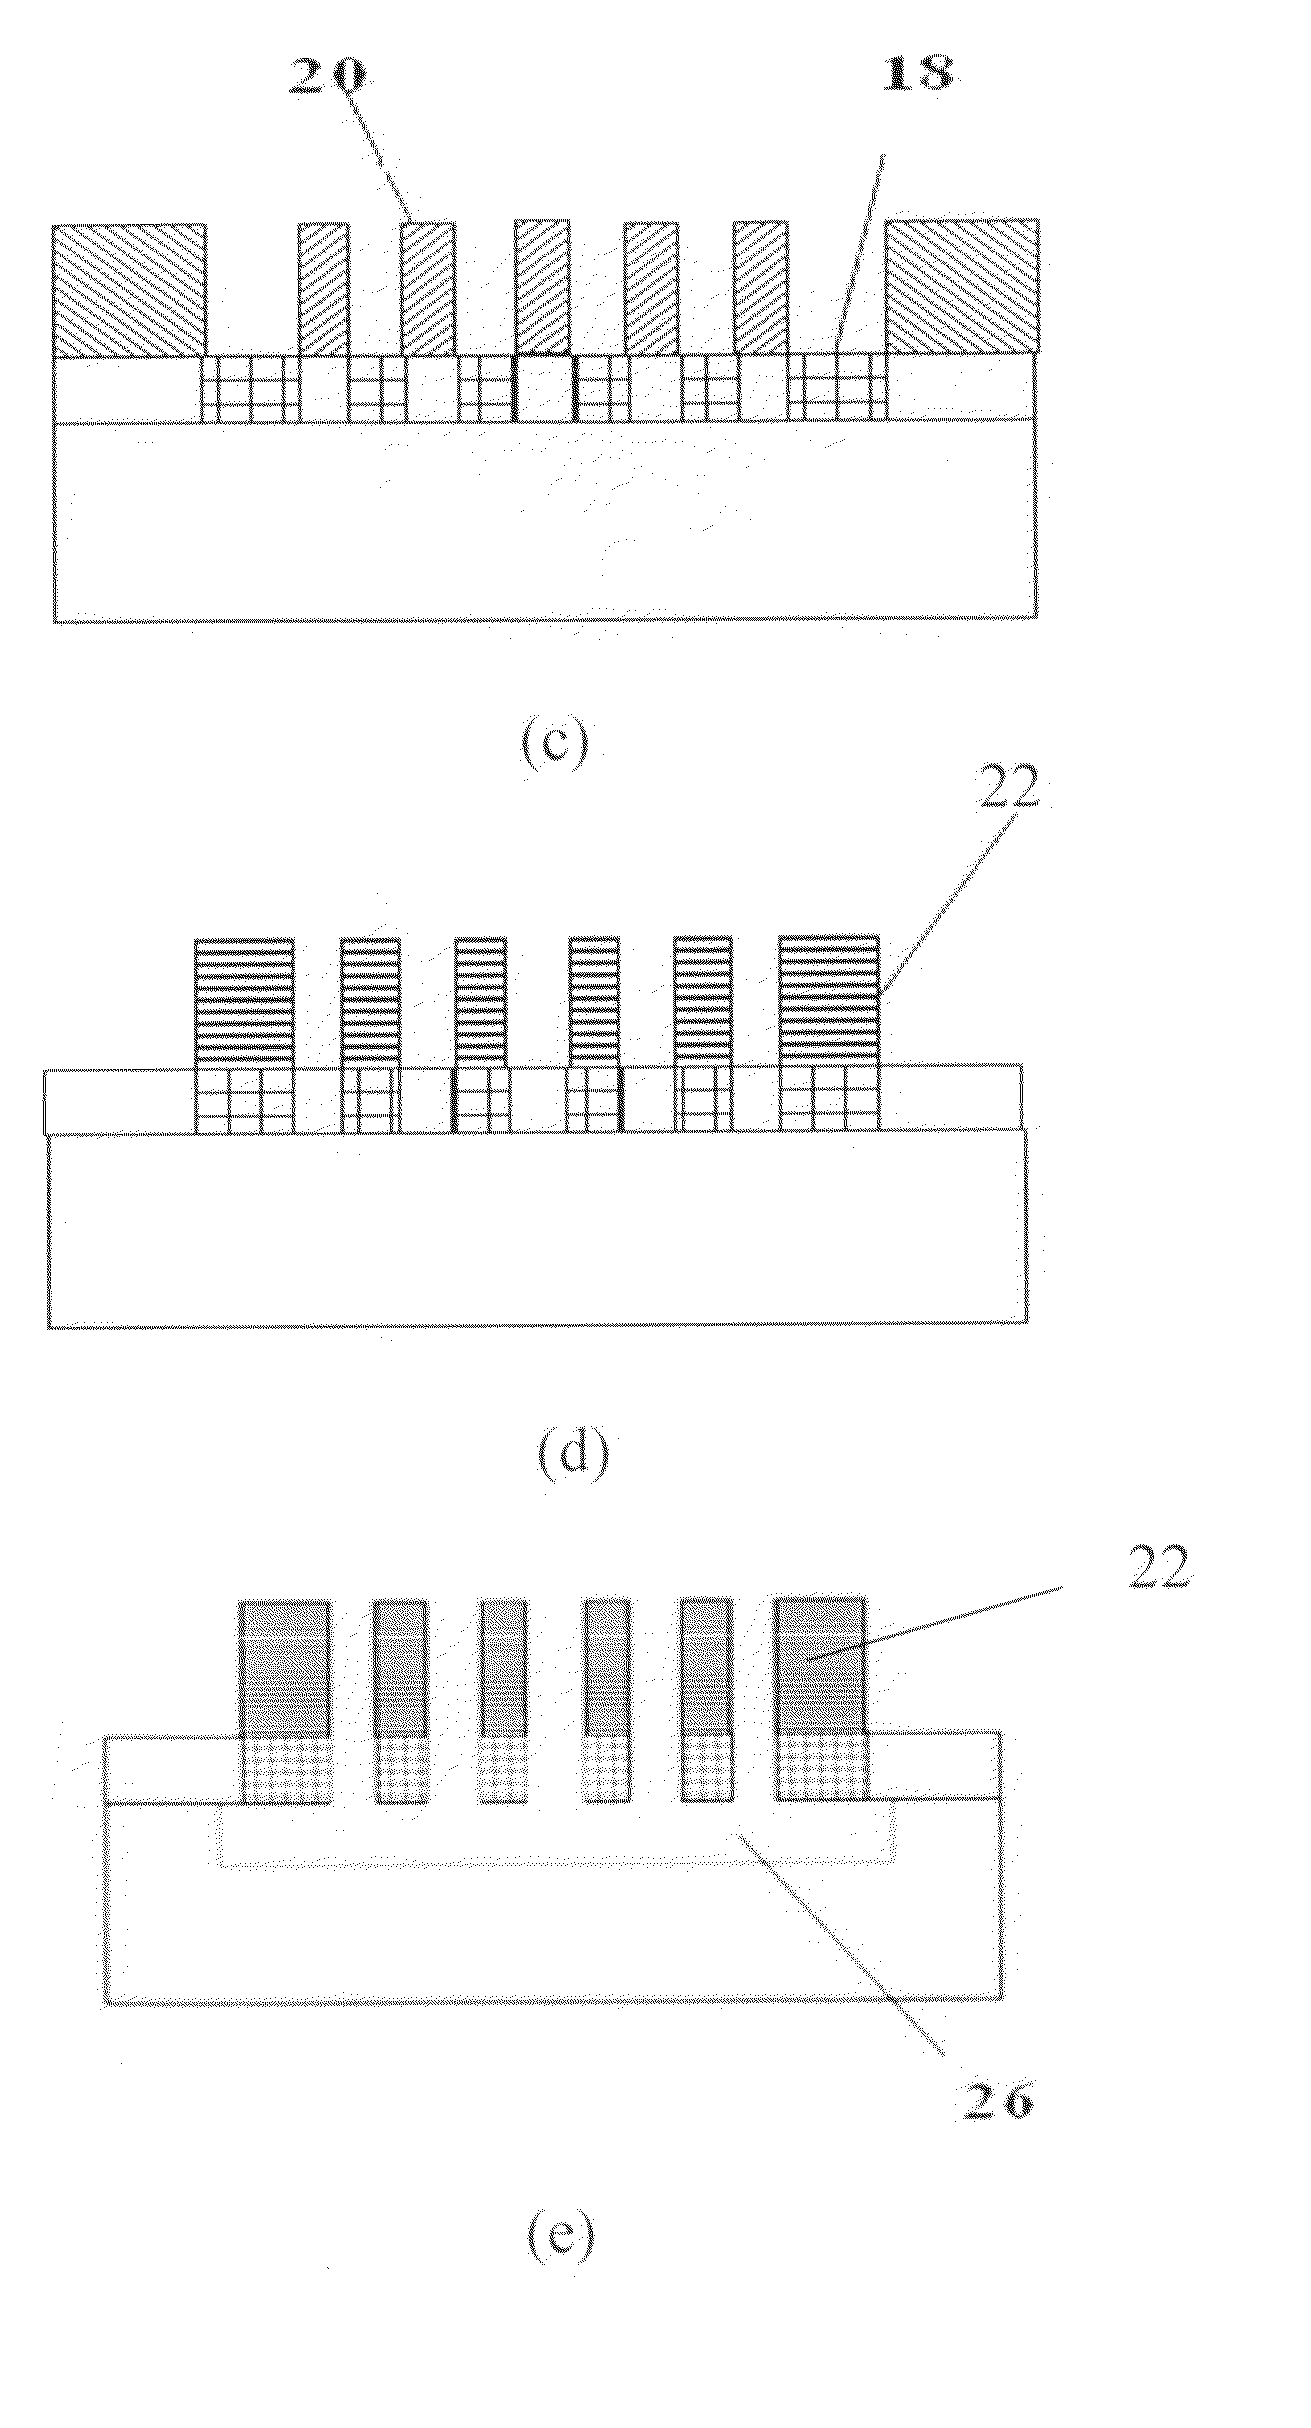 General strength and sensitivity enhancement method for micromachined device